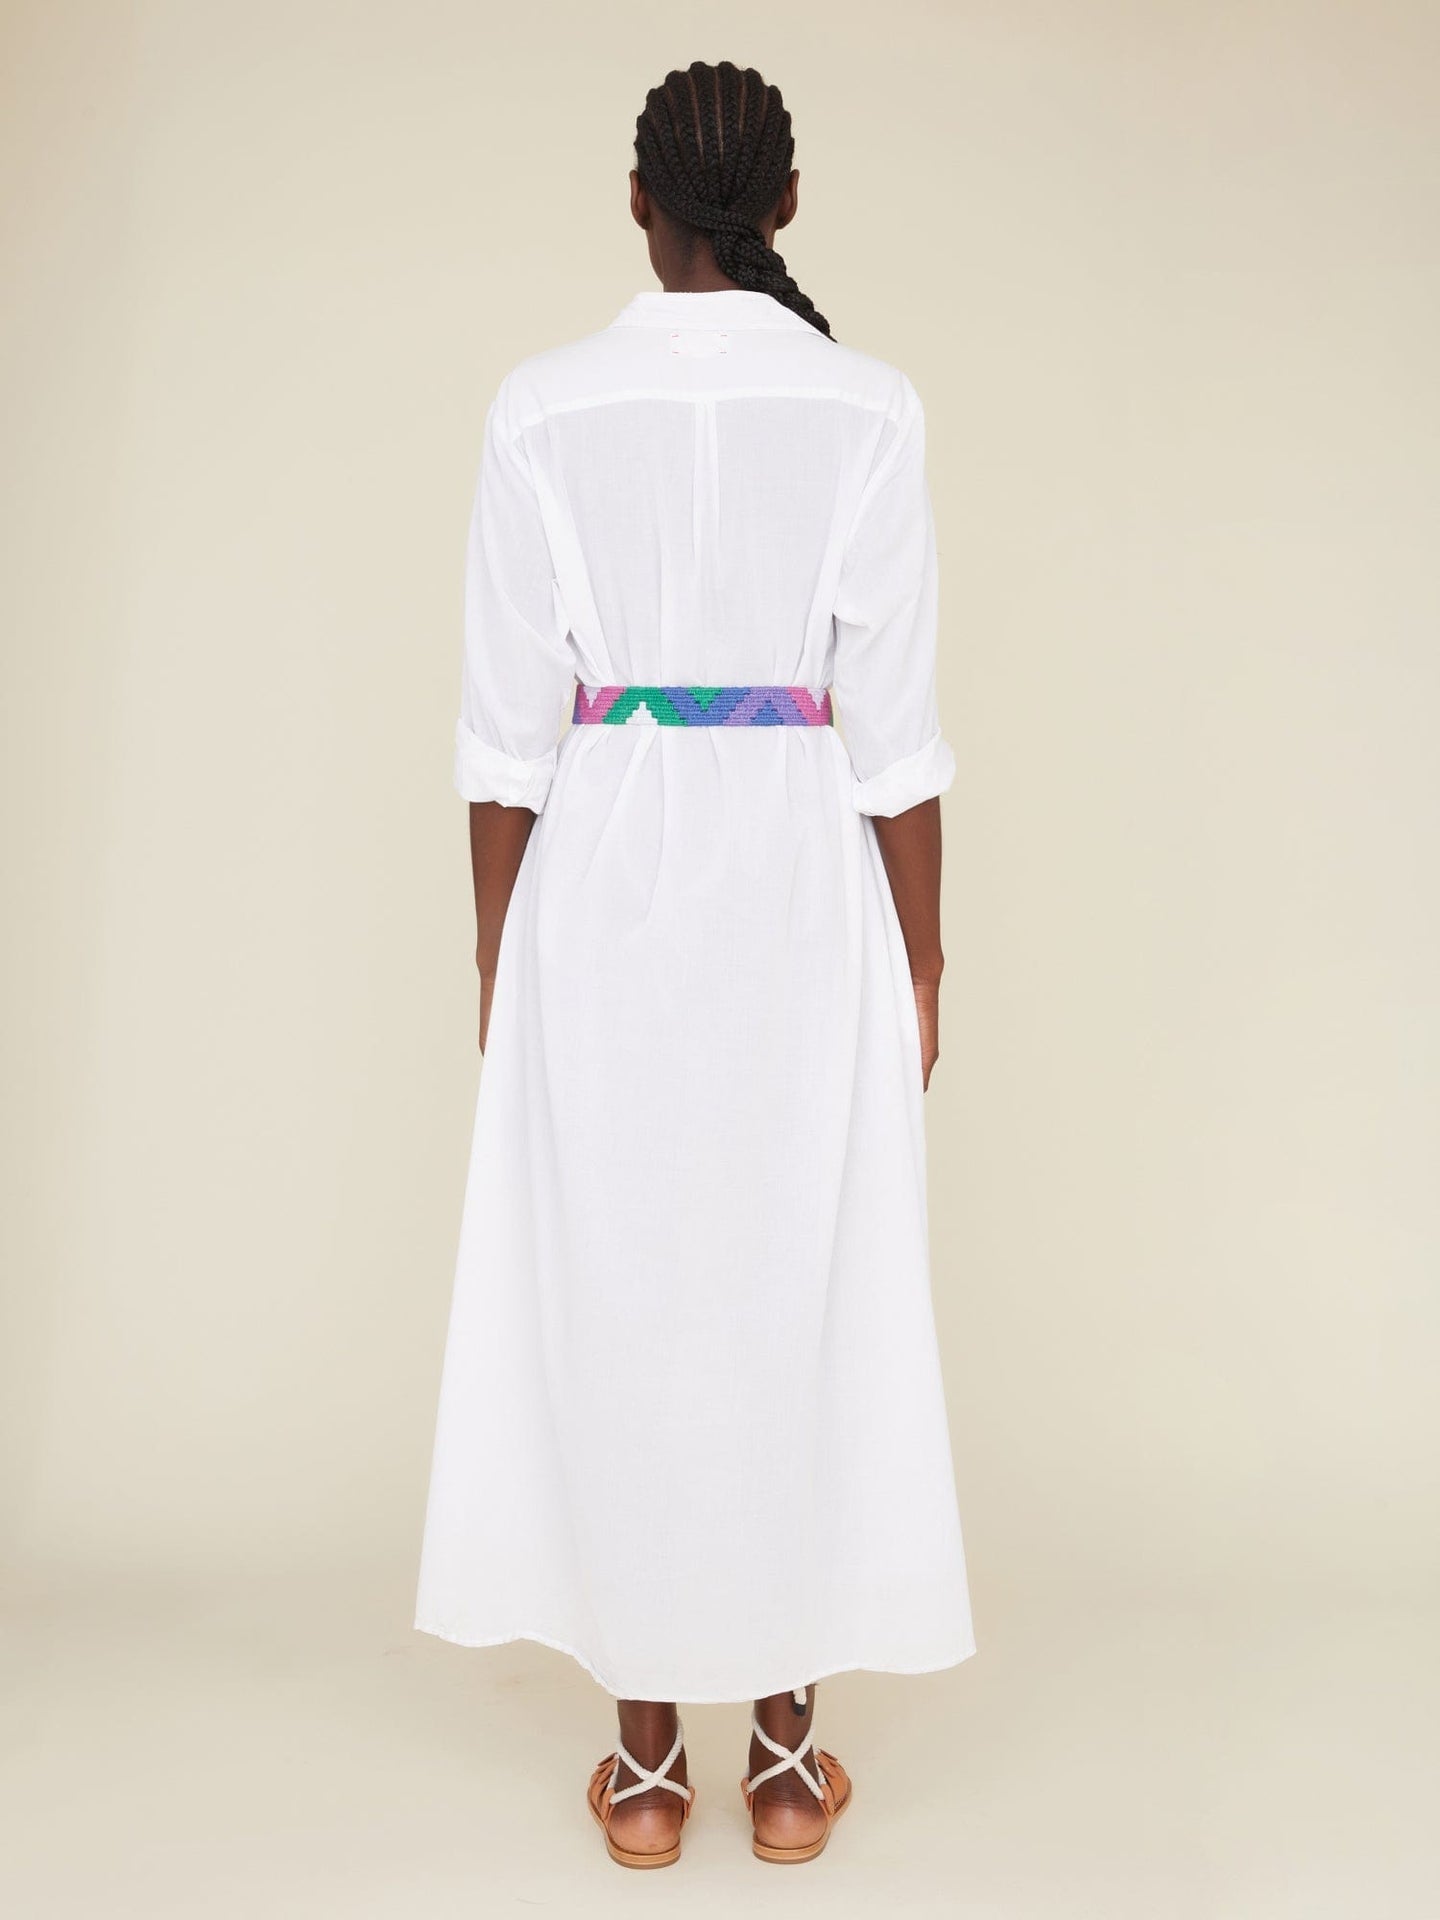 Xirena Boden Dress in White available at TNT The New Trend Australia